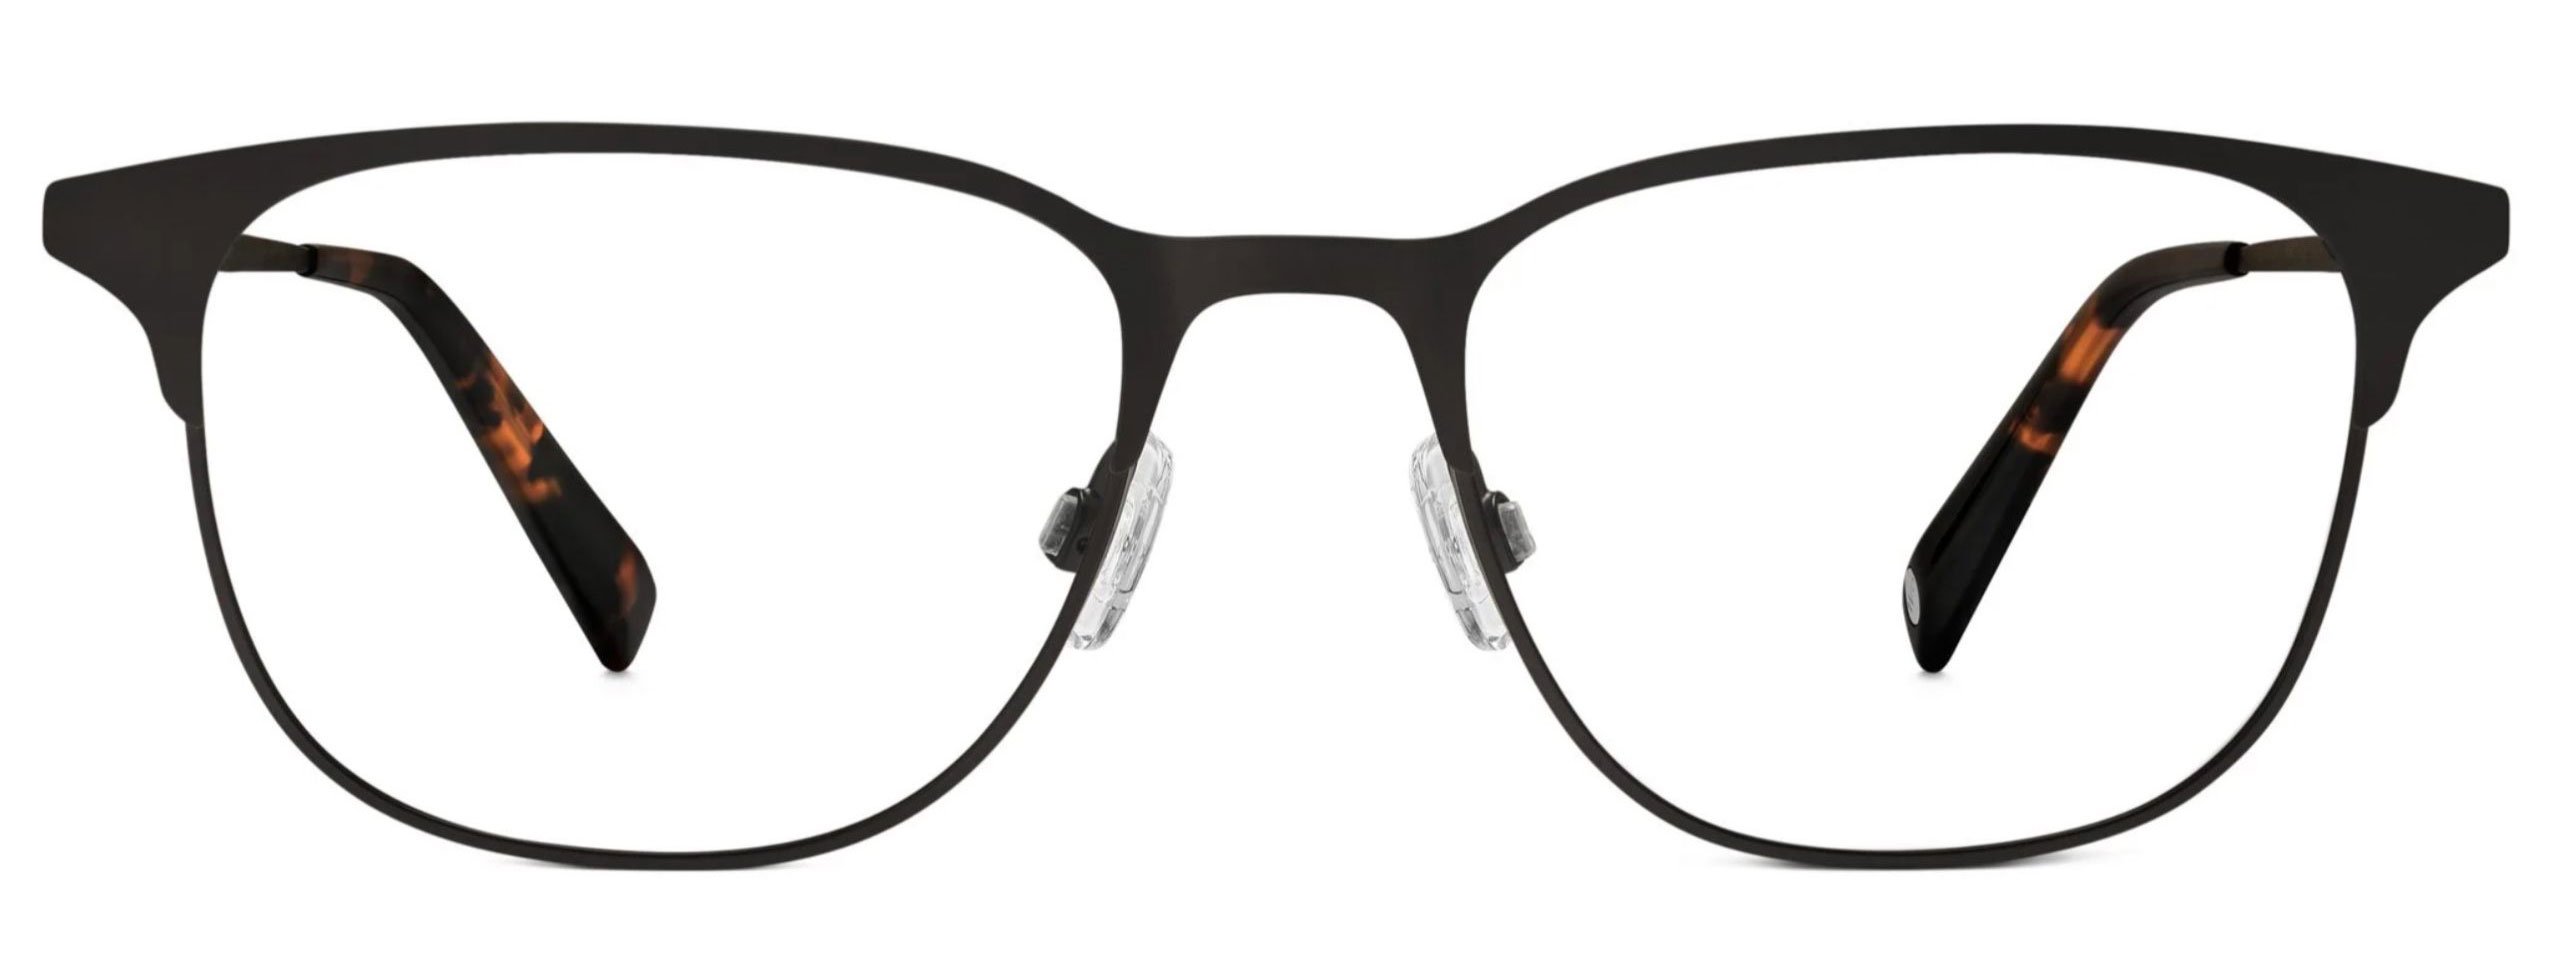 Campbell glasses in carbon